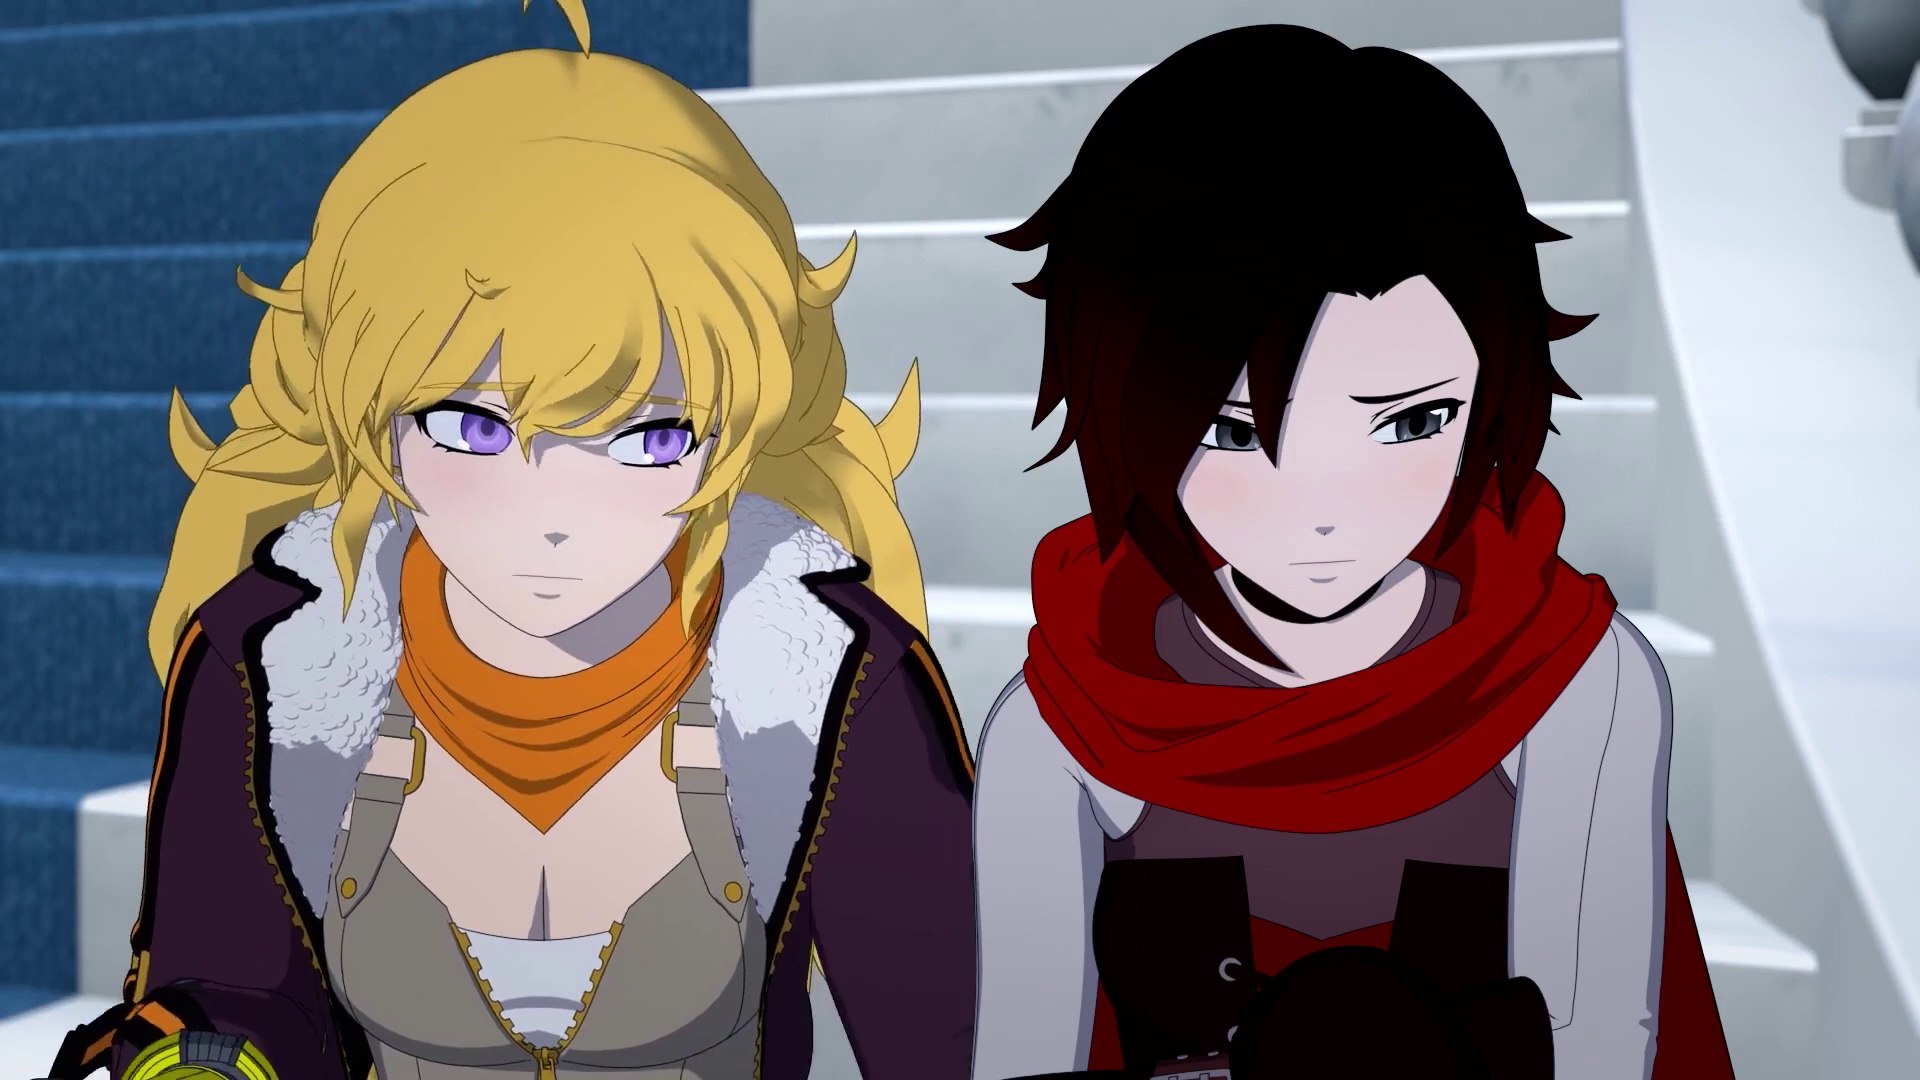 Yang Xiao Long (Barbara Dunkleman) and Ruby Rose (Lindsay Jones) had a tough one in RWBY volume 8